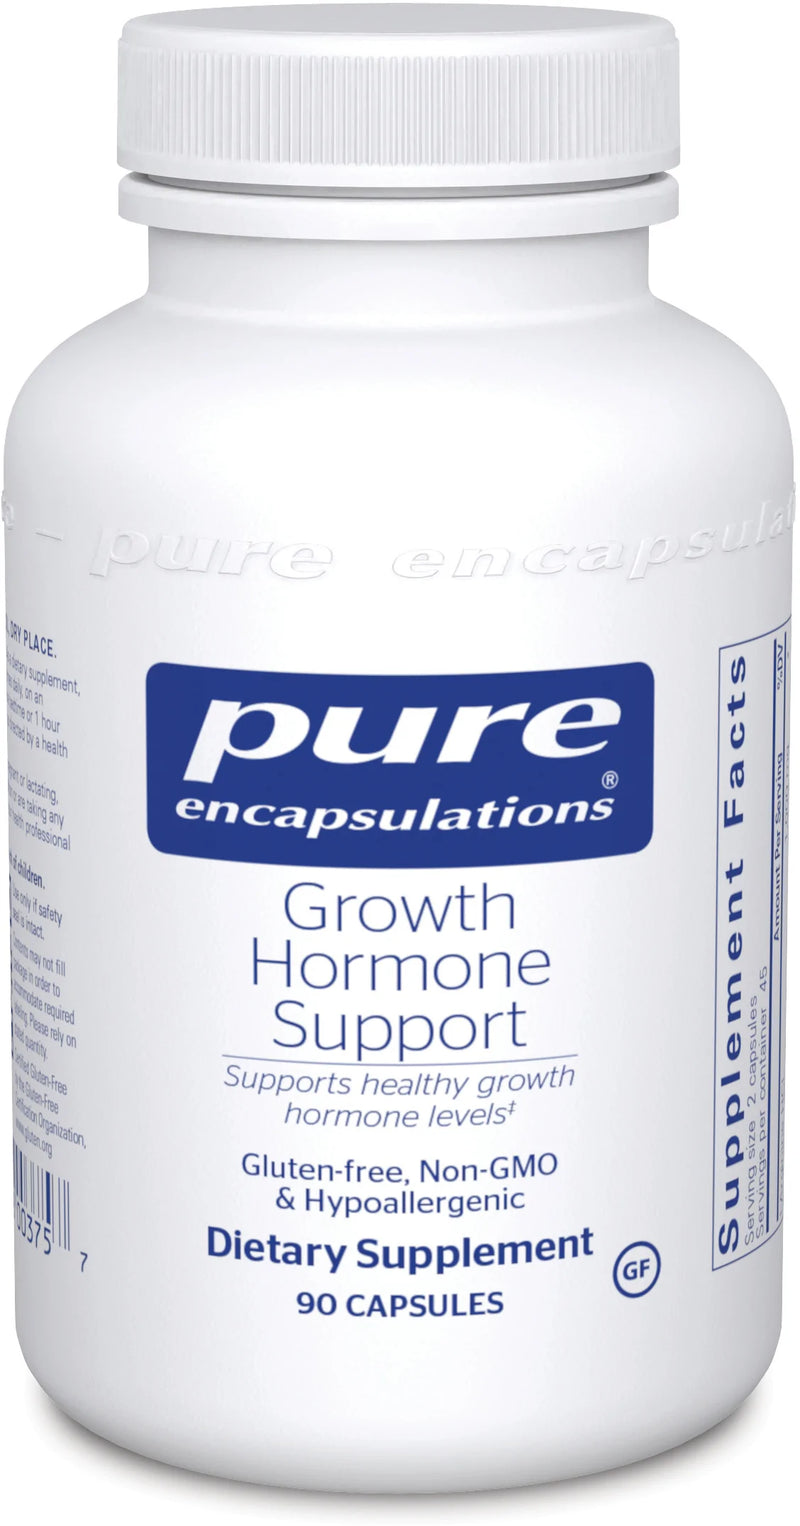 Growth Hormone Support by Pure Encapsulations®